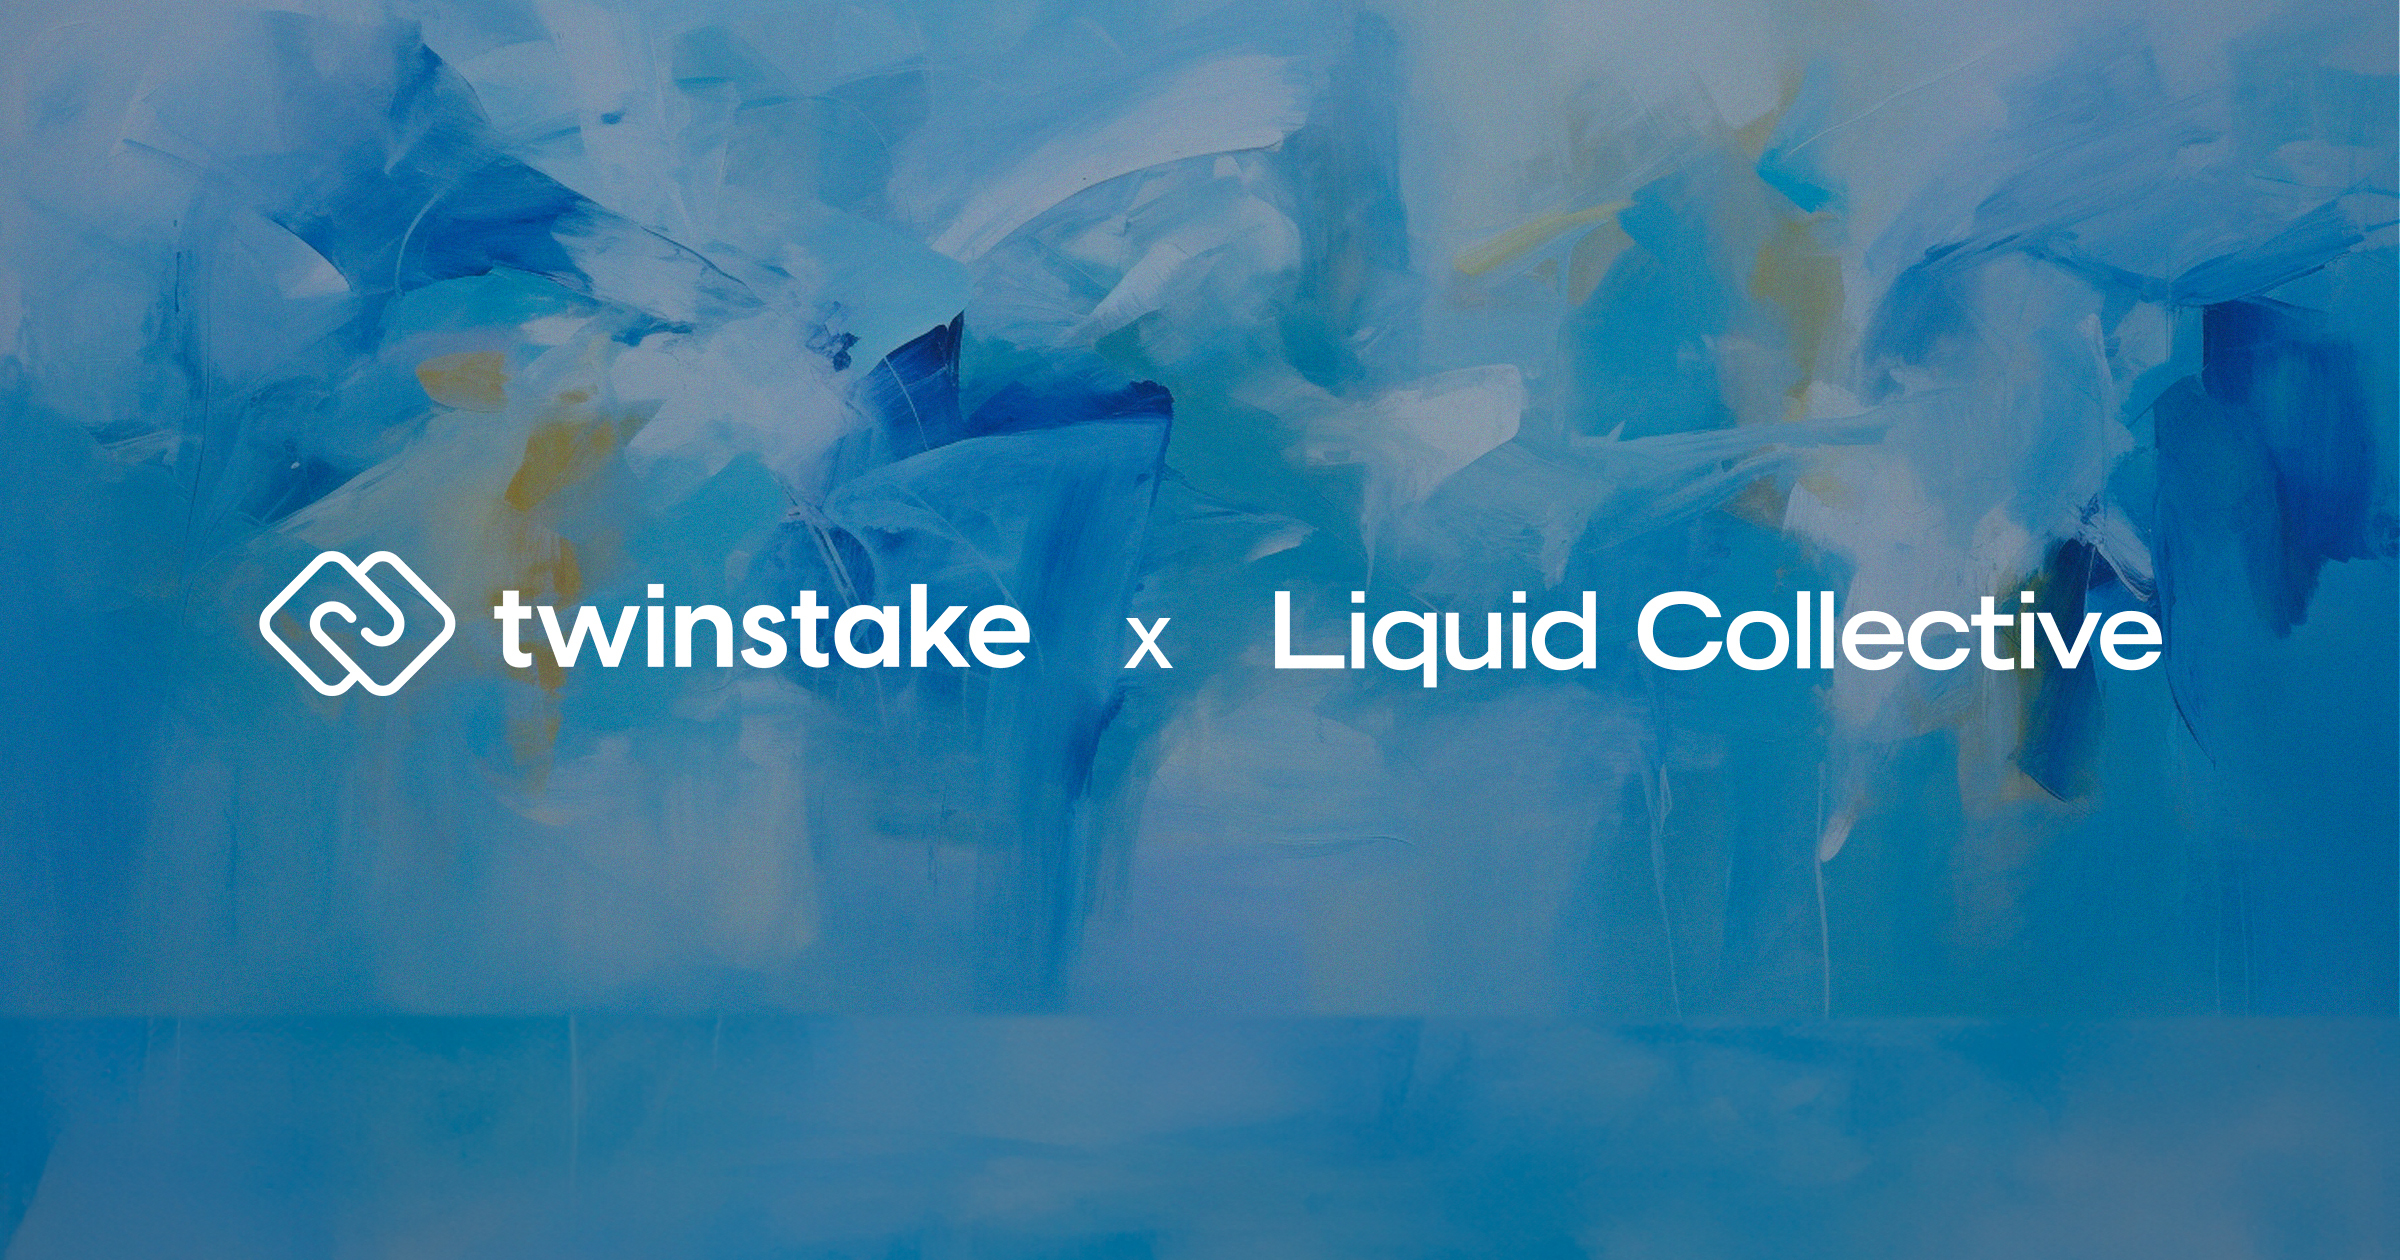 Twinstake joins as a Platform to offer institutional liquid staking